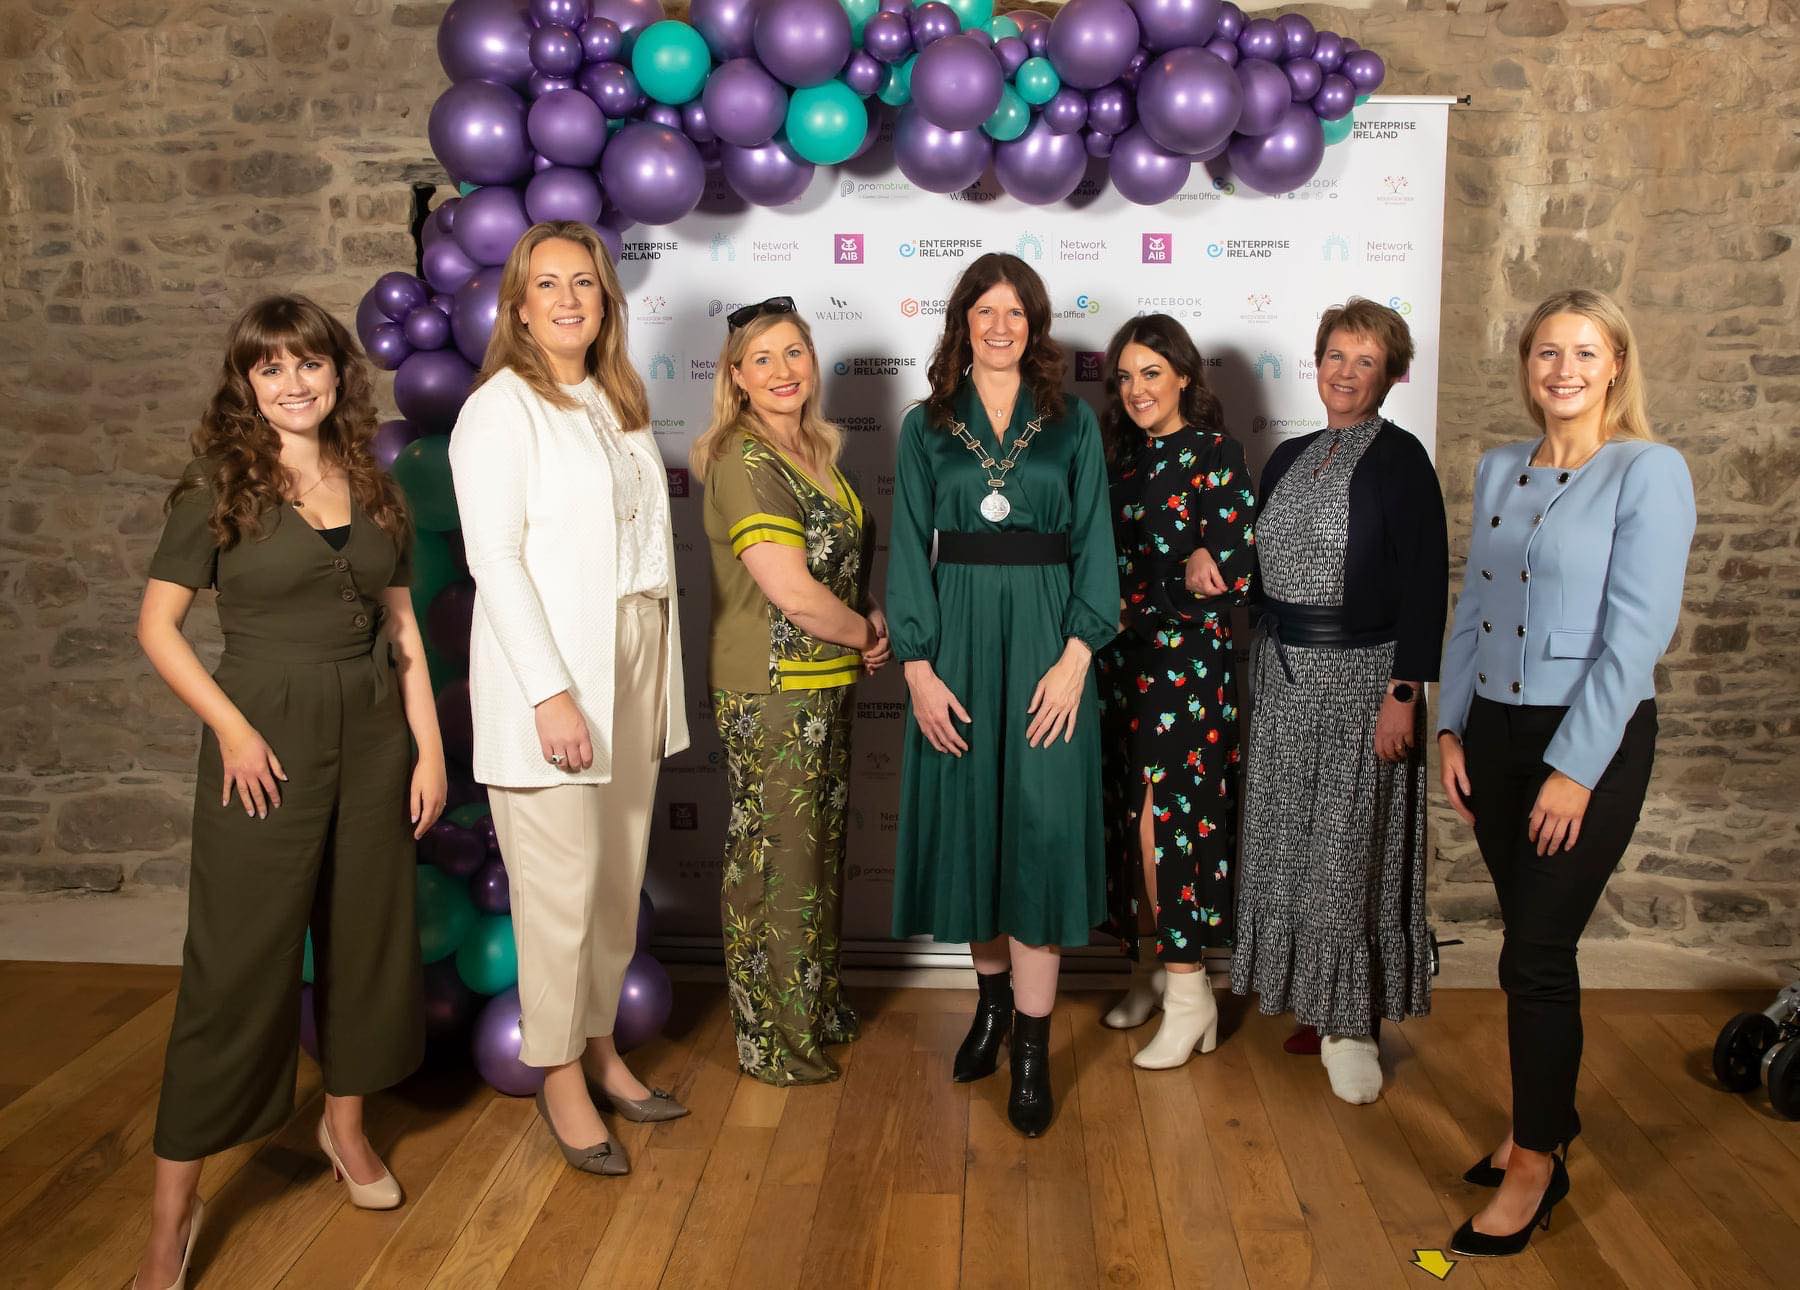 Network Ireland Limerick and Clionas - Pictured above are members of Network Ireland Limerick with winners of the Network Ireland Limerick Businesswoman of the Year Awards 2021